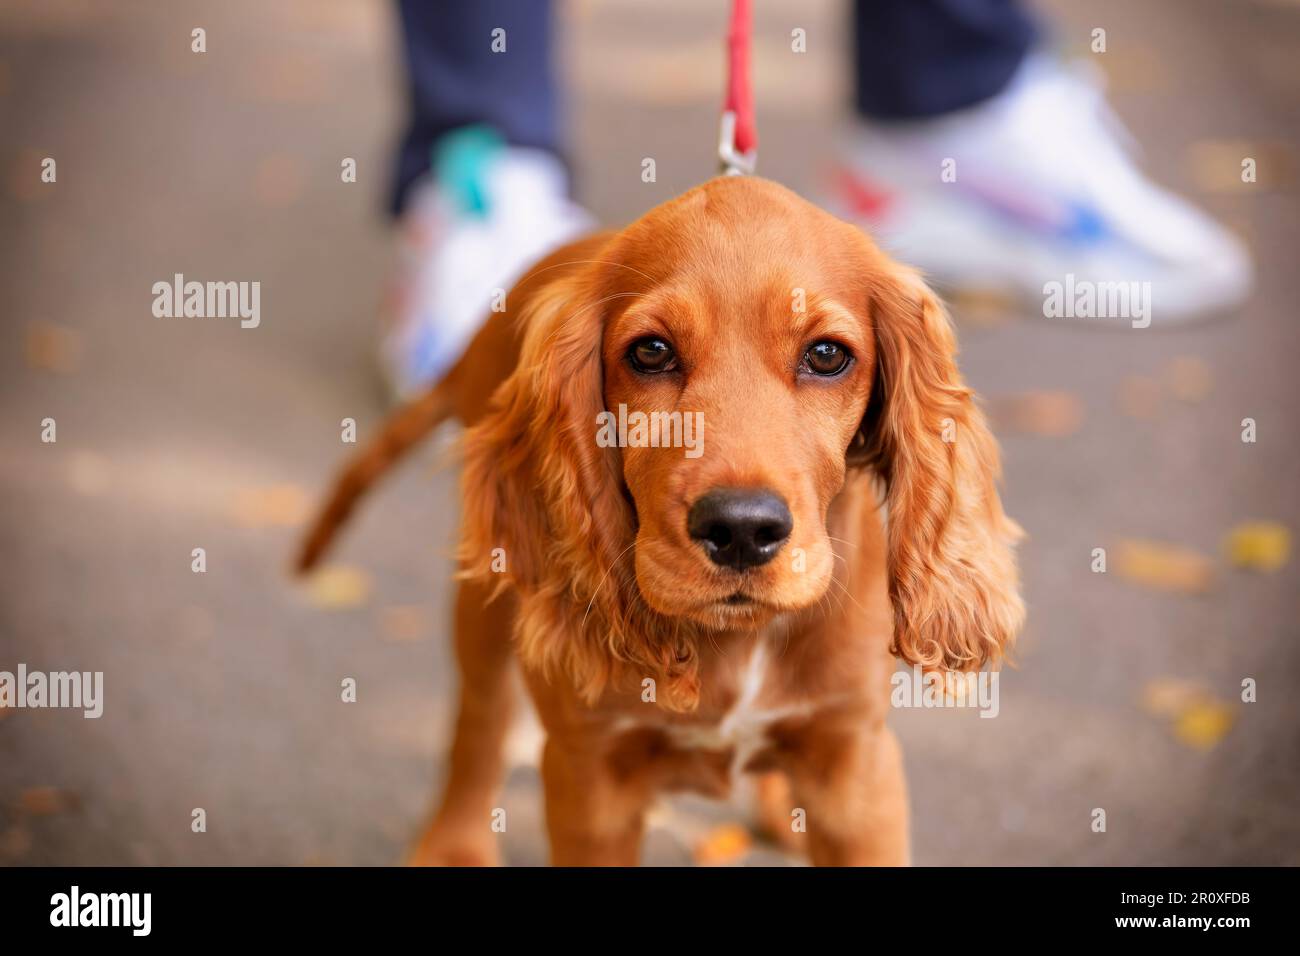 Cute puppy with luscious orange/red fur and a very joyful demeanor. Autumn environment in IOR Park, Bucharest. Stock Photo